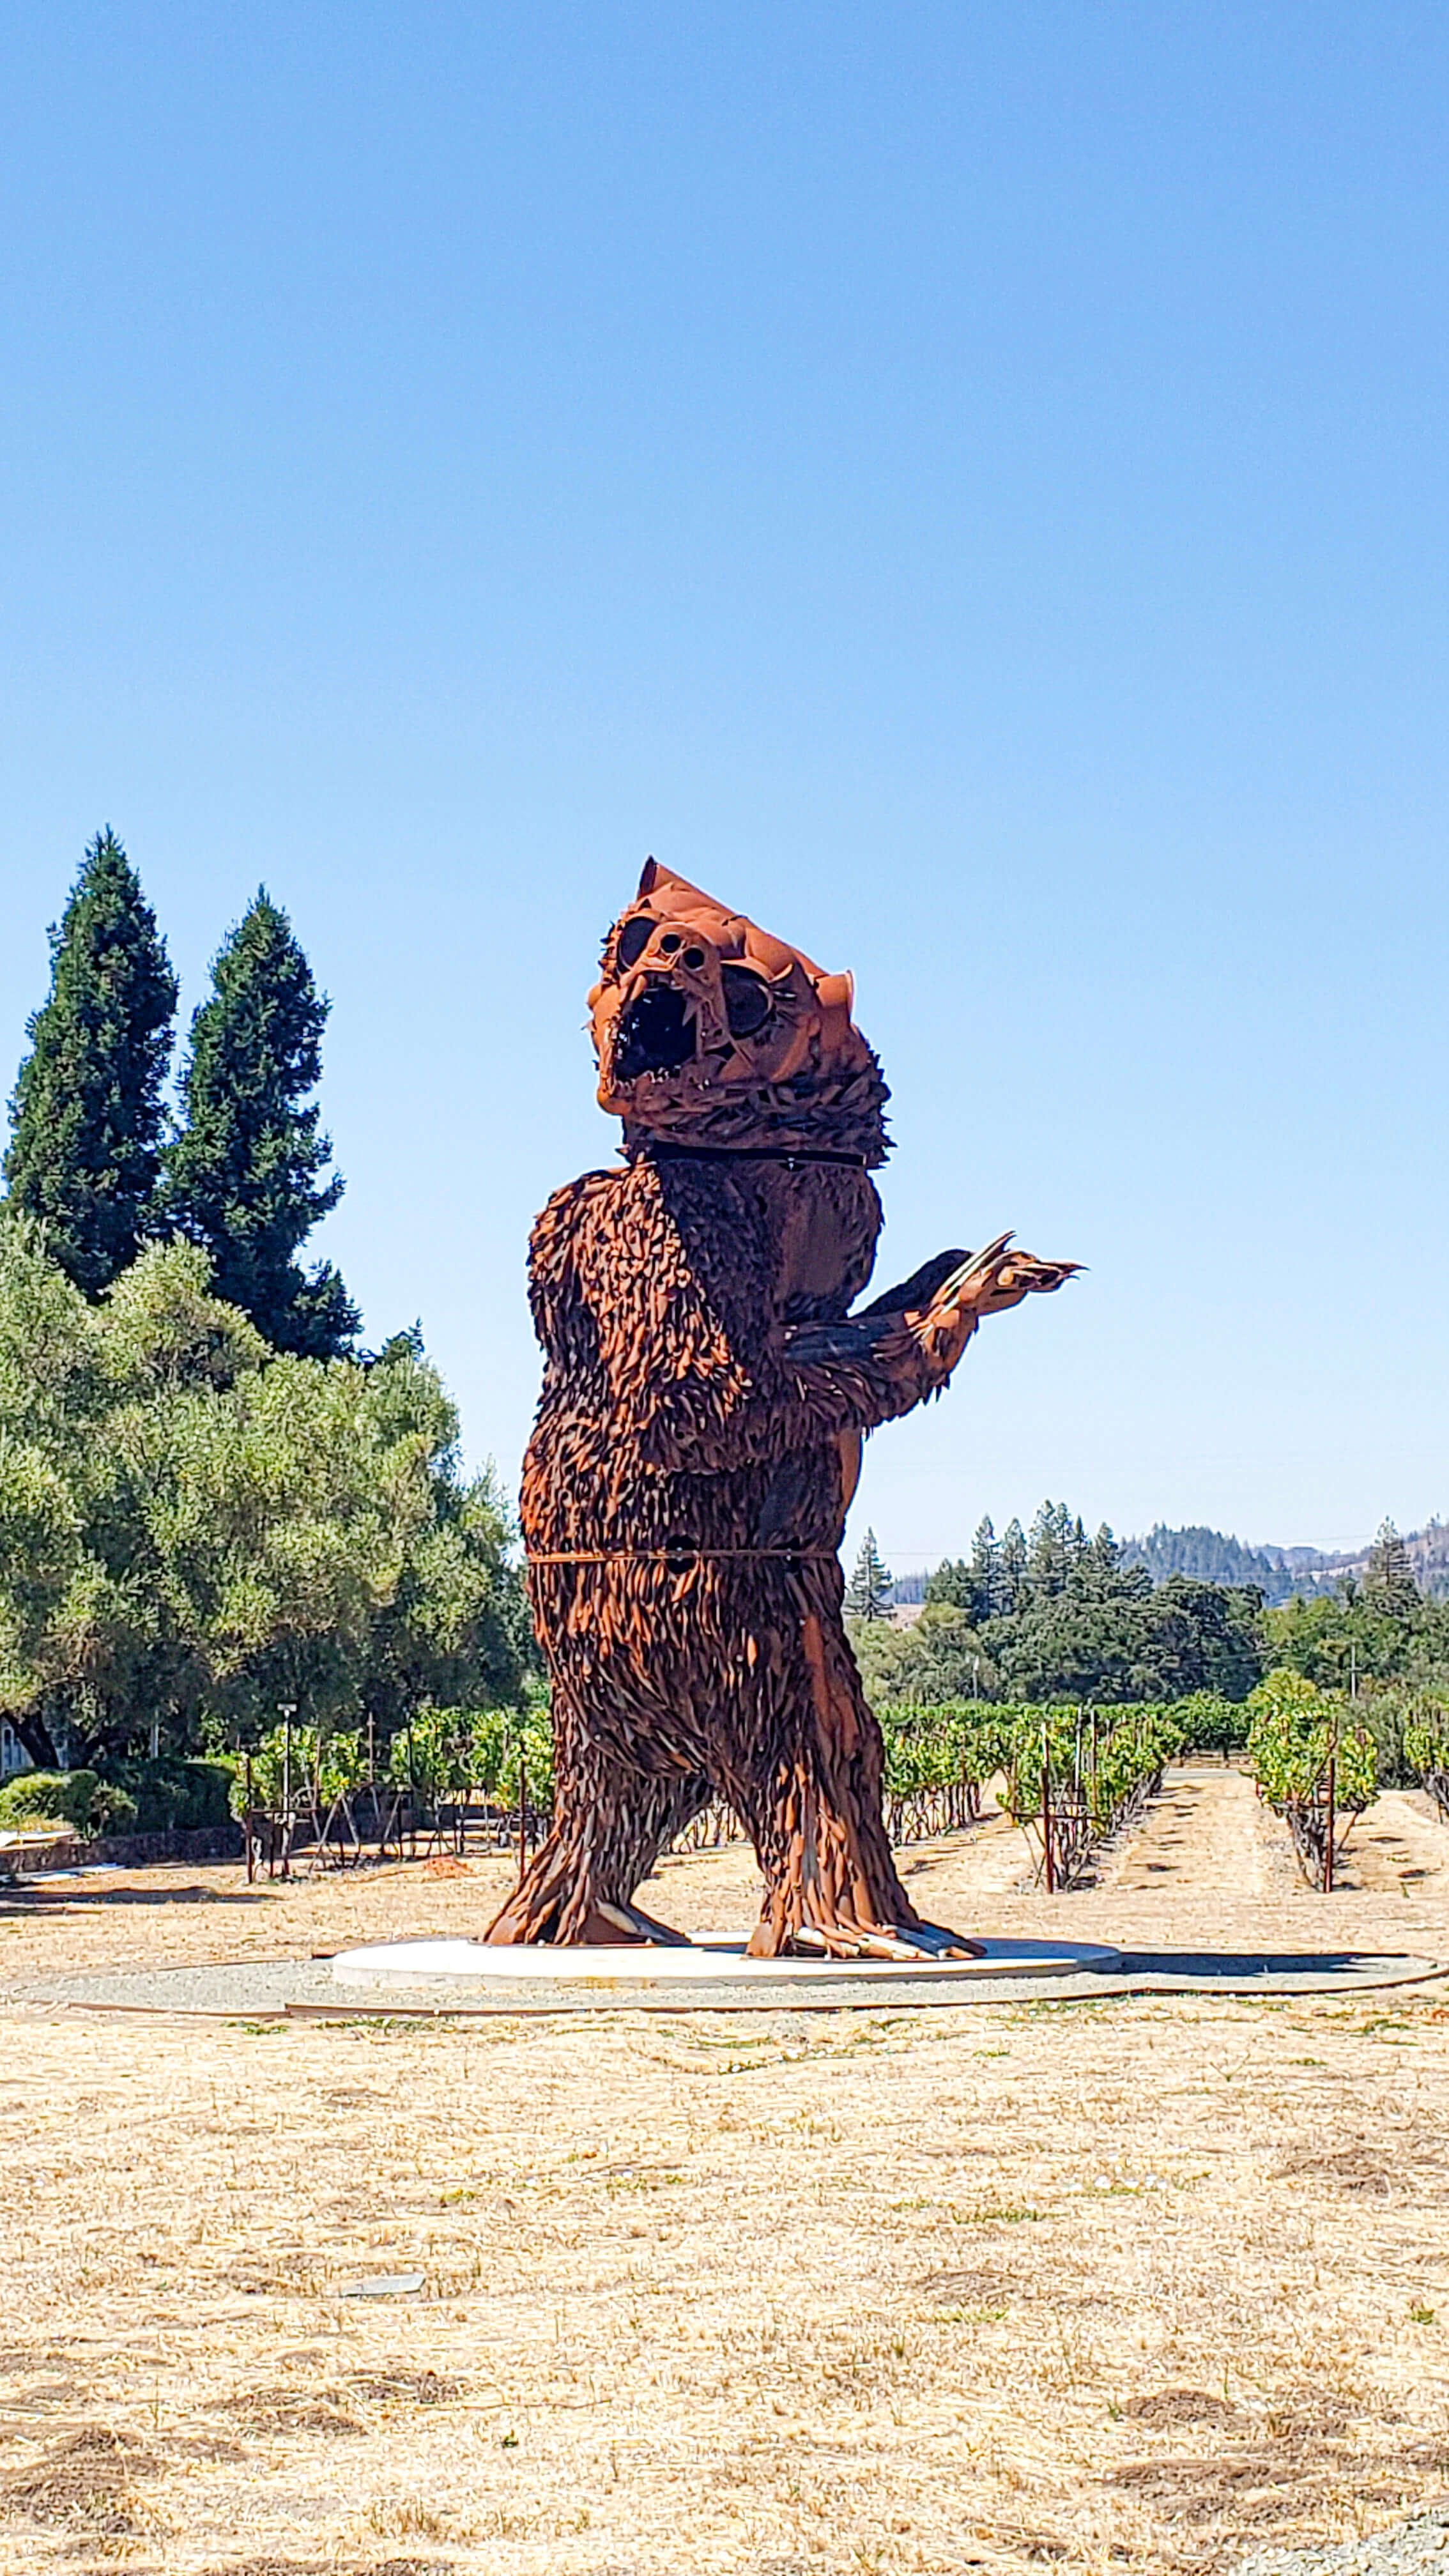 Giant bear statue at St. Anne's Crossing in Sonoma County